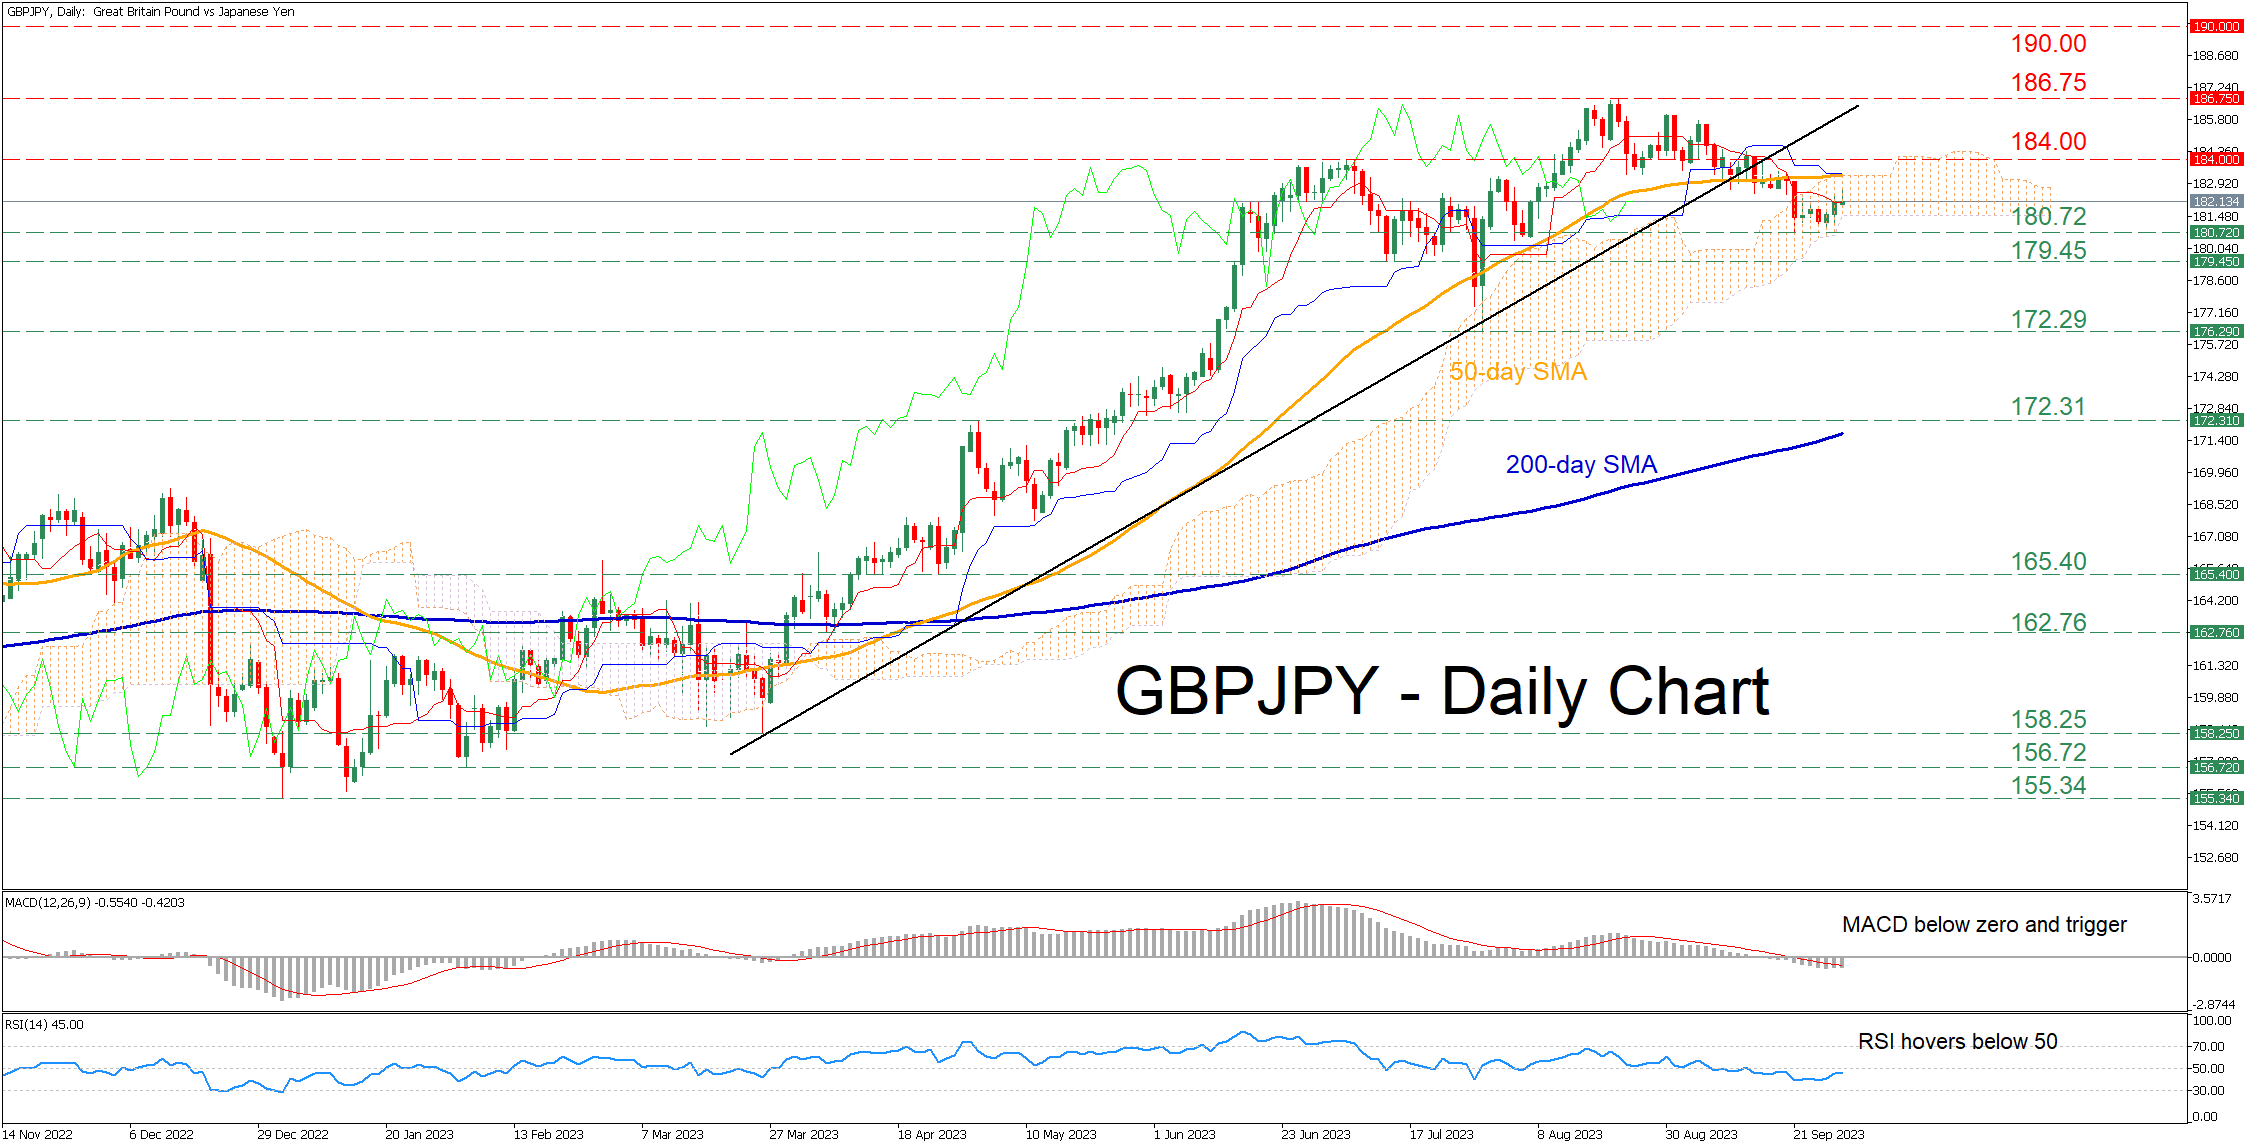 The GBPJPY pair experienced a noteworthy slide below the 50-day Simple Moving Average (SMA) last week